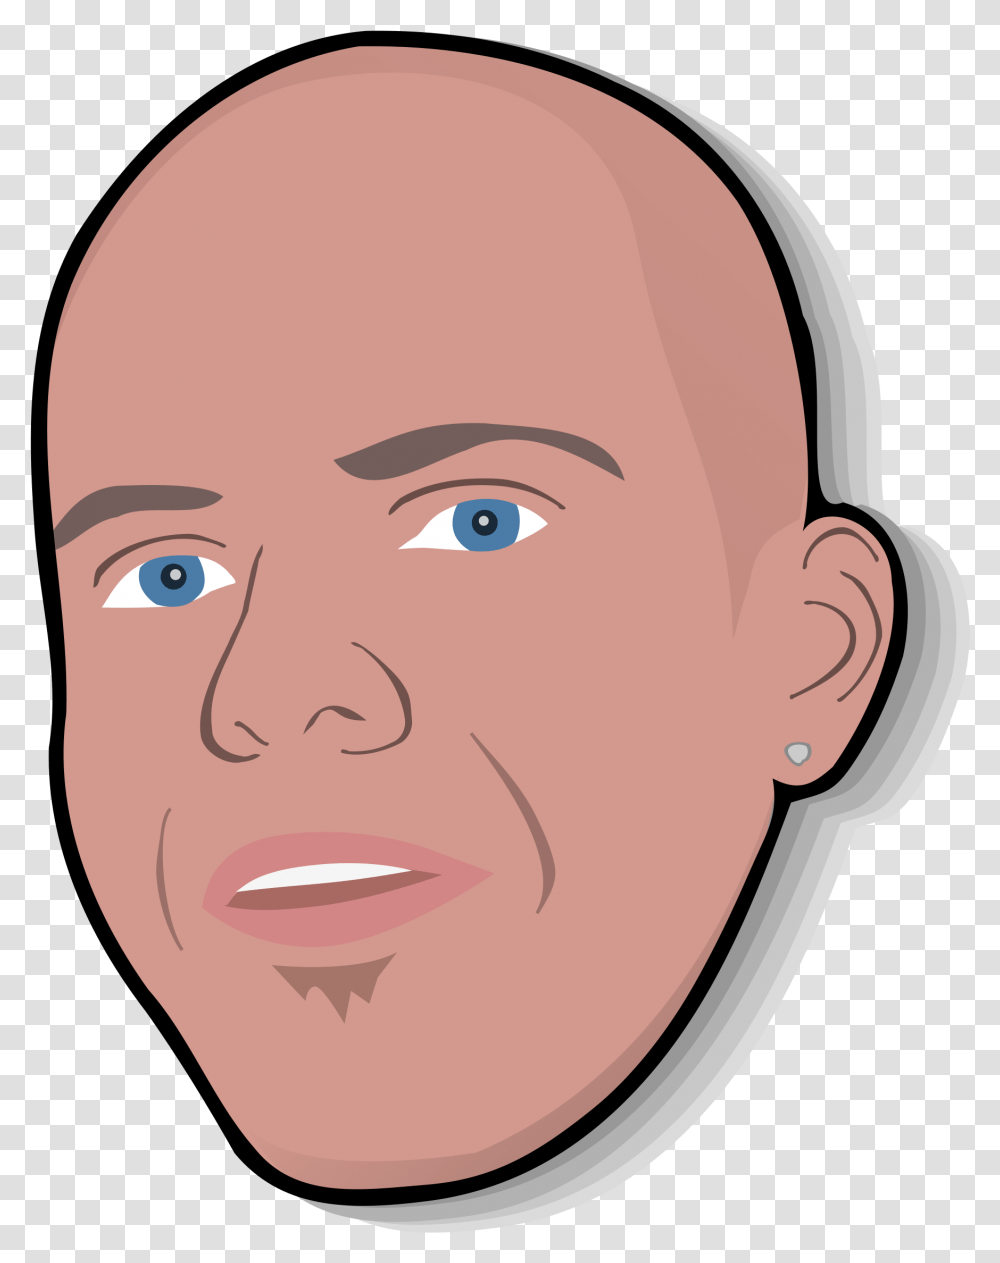 Rejon S Head Clip Arts No Hair Blue Eyes Male, Face, Jaw, Skin, Smile Transparent Png